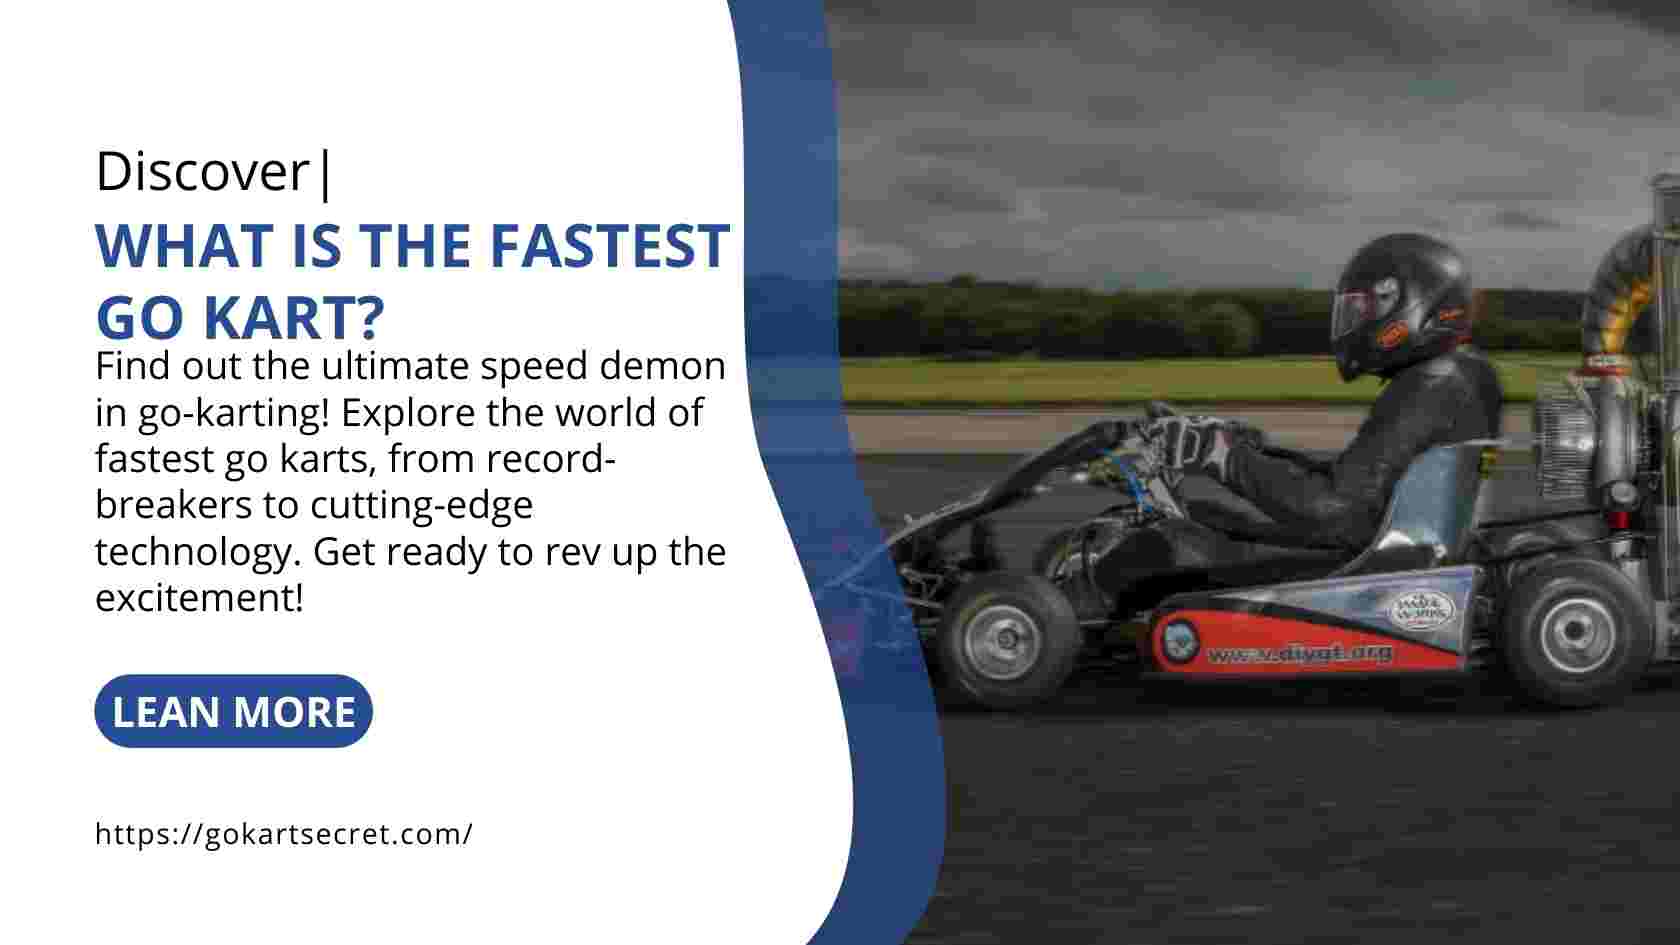 What Is the Fastest Go Kart?